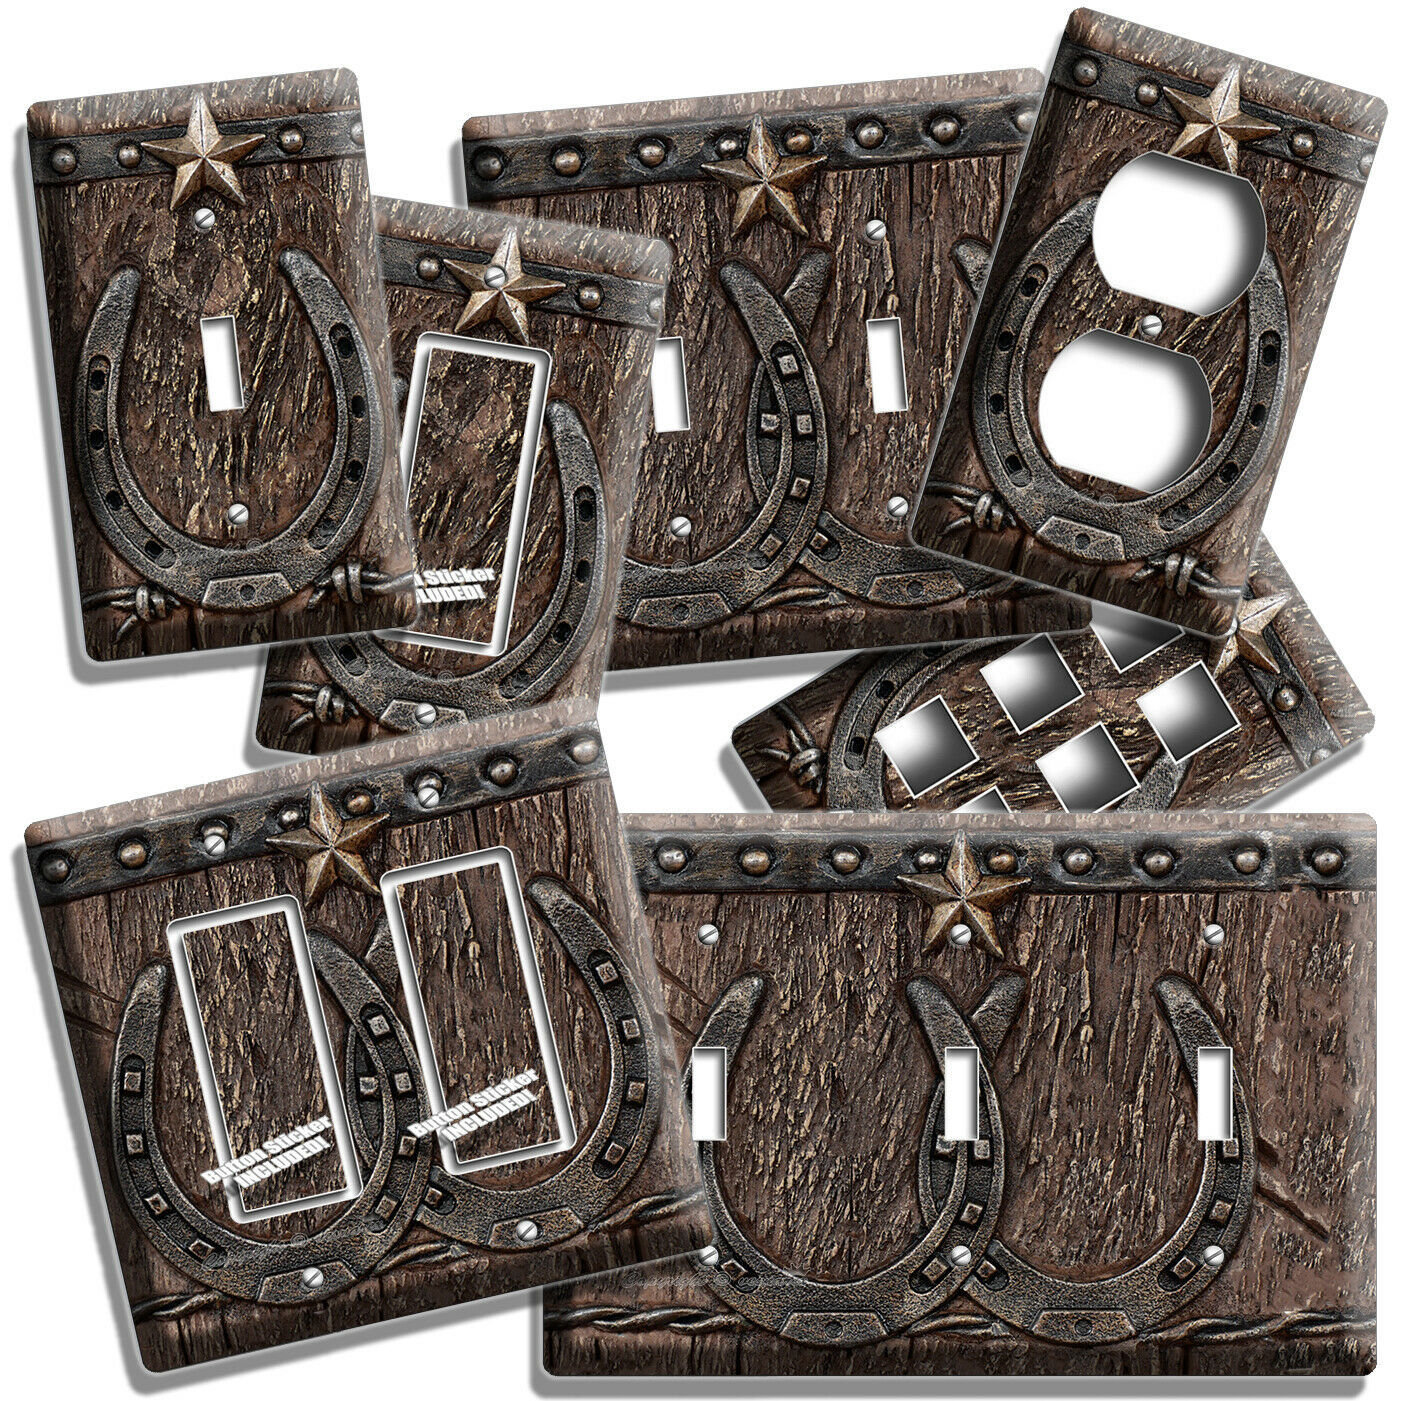 RUSTIC WESTERN COWBOY LONE STAR LUCKY HORSESHOE LIGHT SWITCH OUTLET WALL DECOR - $11.39 - $28.49